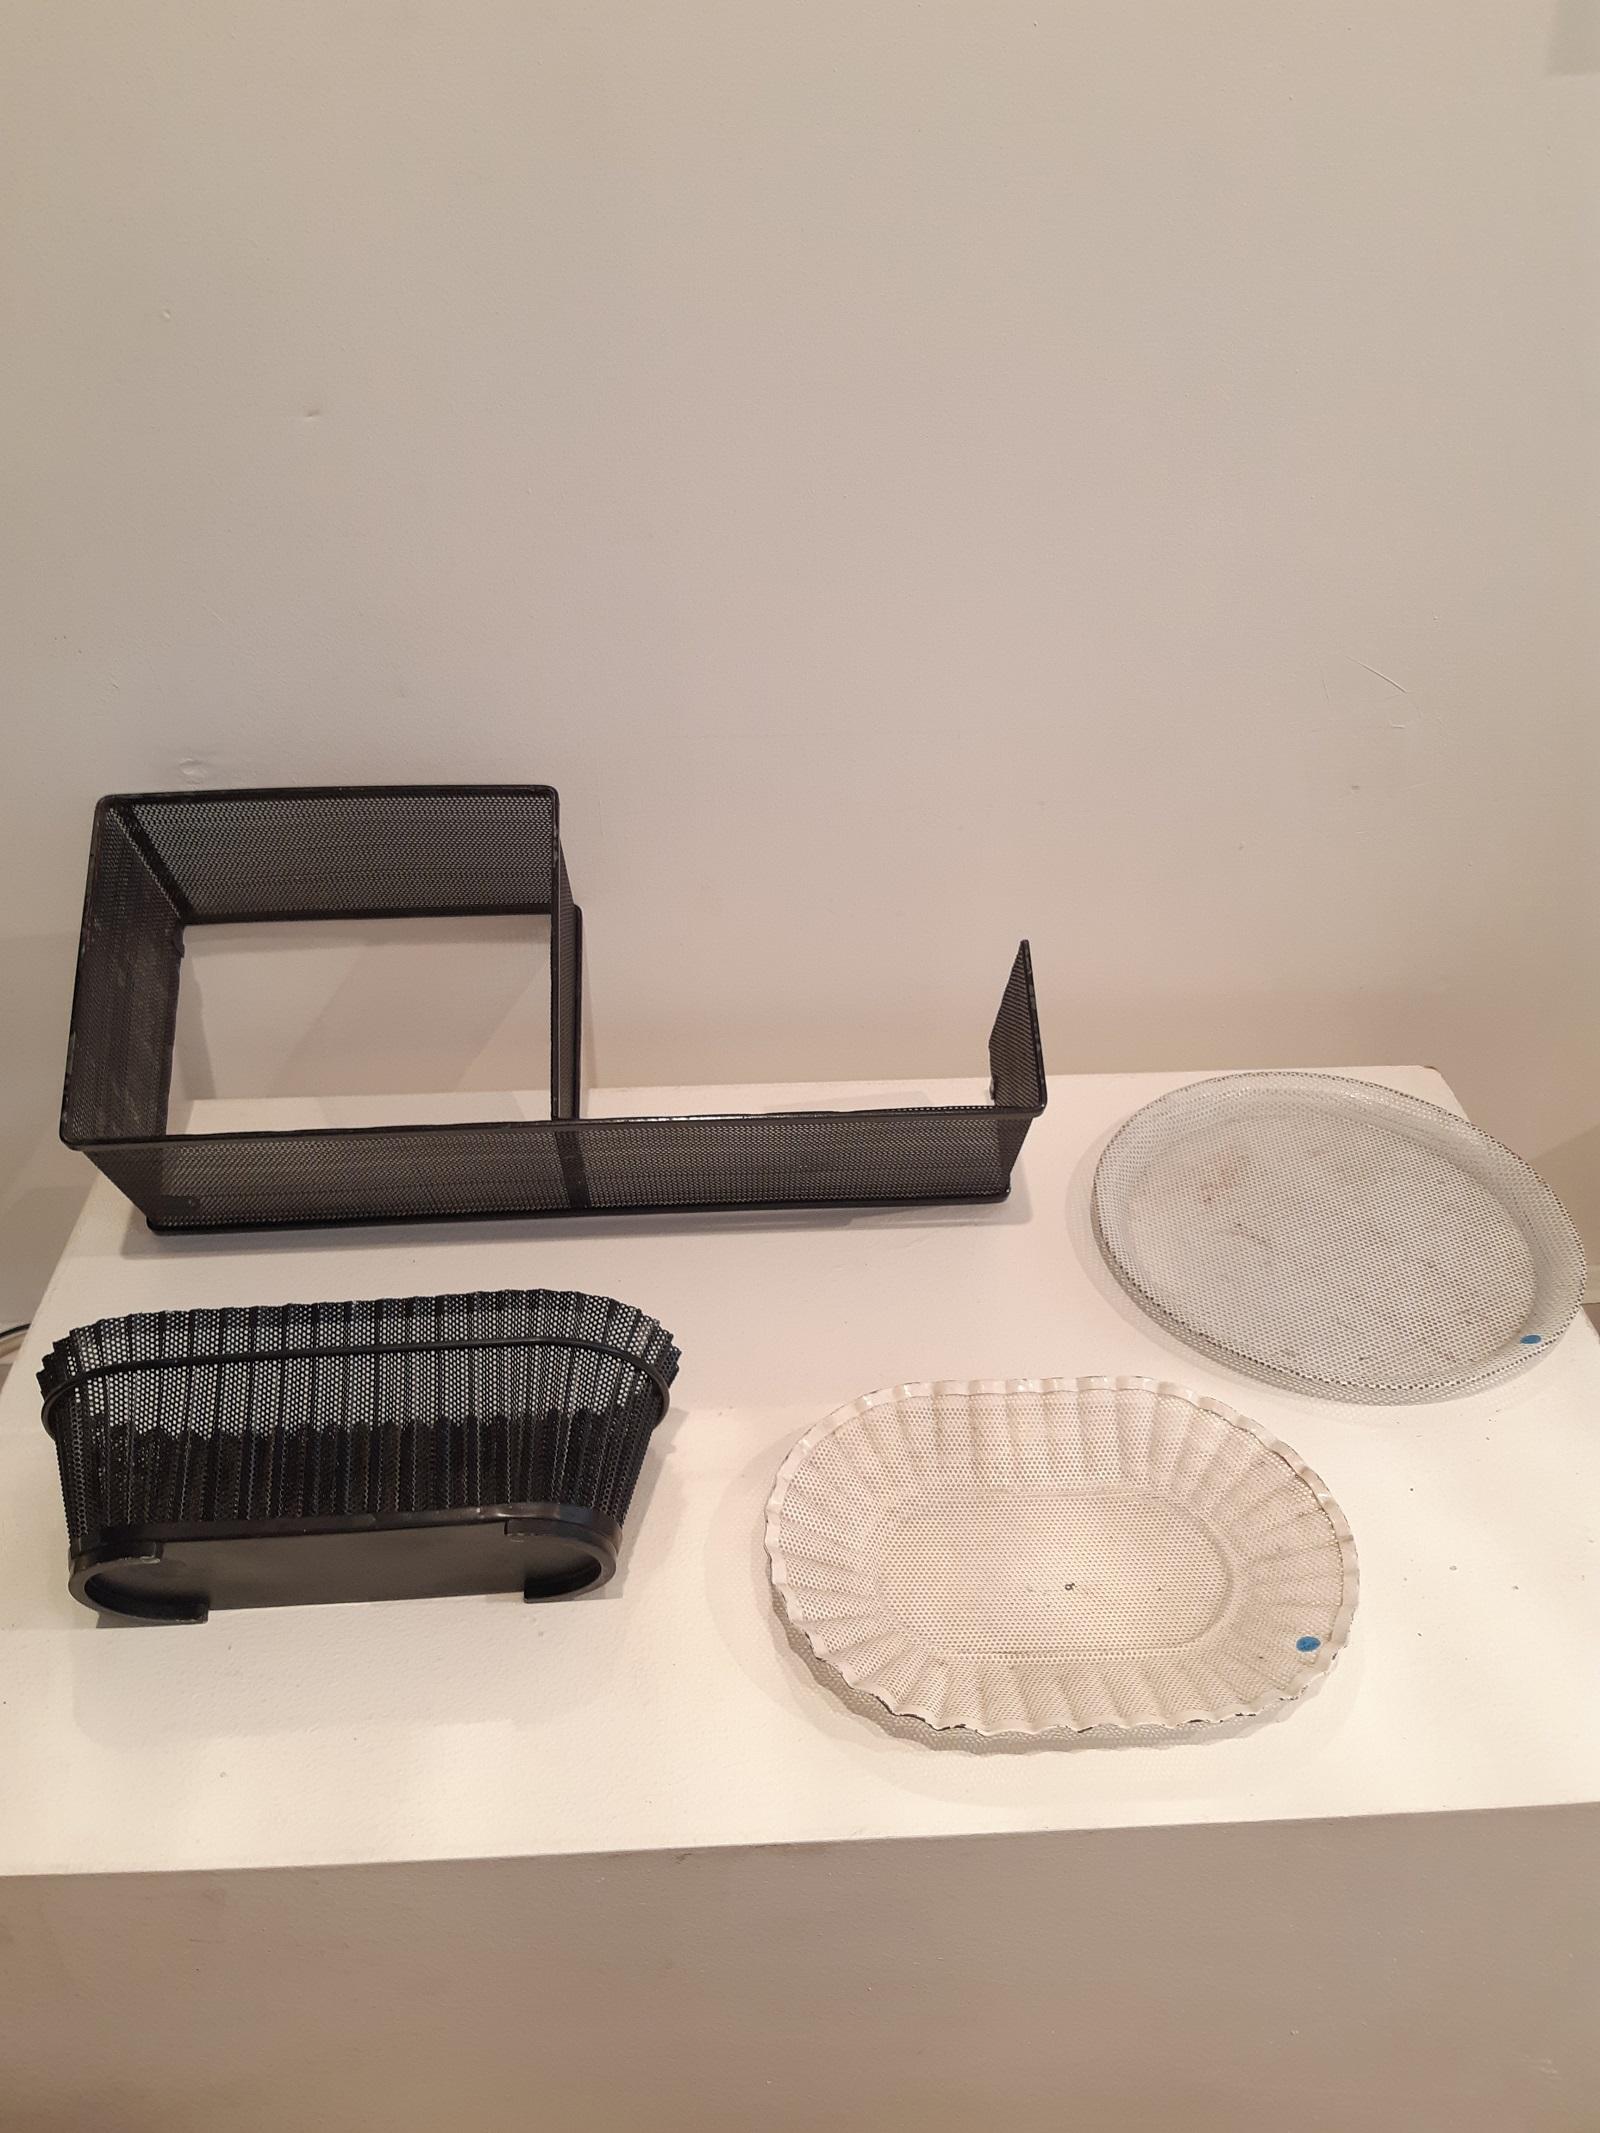 4 Pieces by Mathieu Mategot Rigitulle France 1950 Planter/Escargot Shelf/Tray
This set is composed of 1 Escargot shelf, 1 planter and 2 trays.
2 missing hooks on the shelf but it can be hung on a wall.
Orginal paint on the 4 pieces, traces of